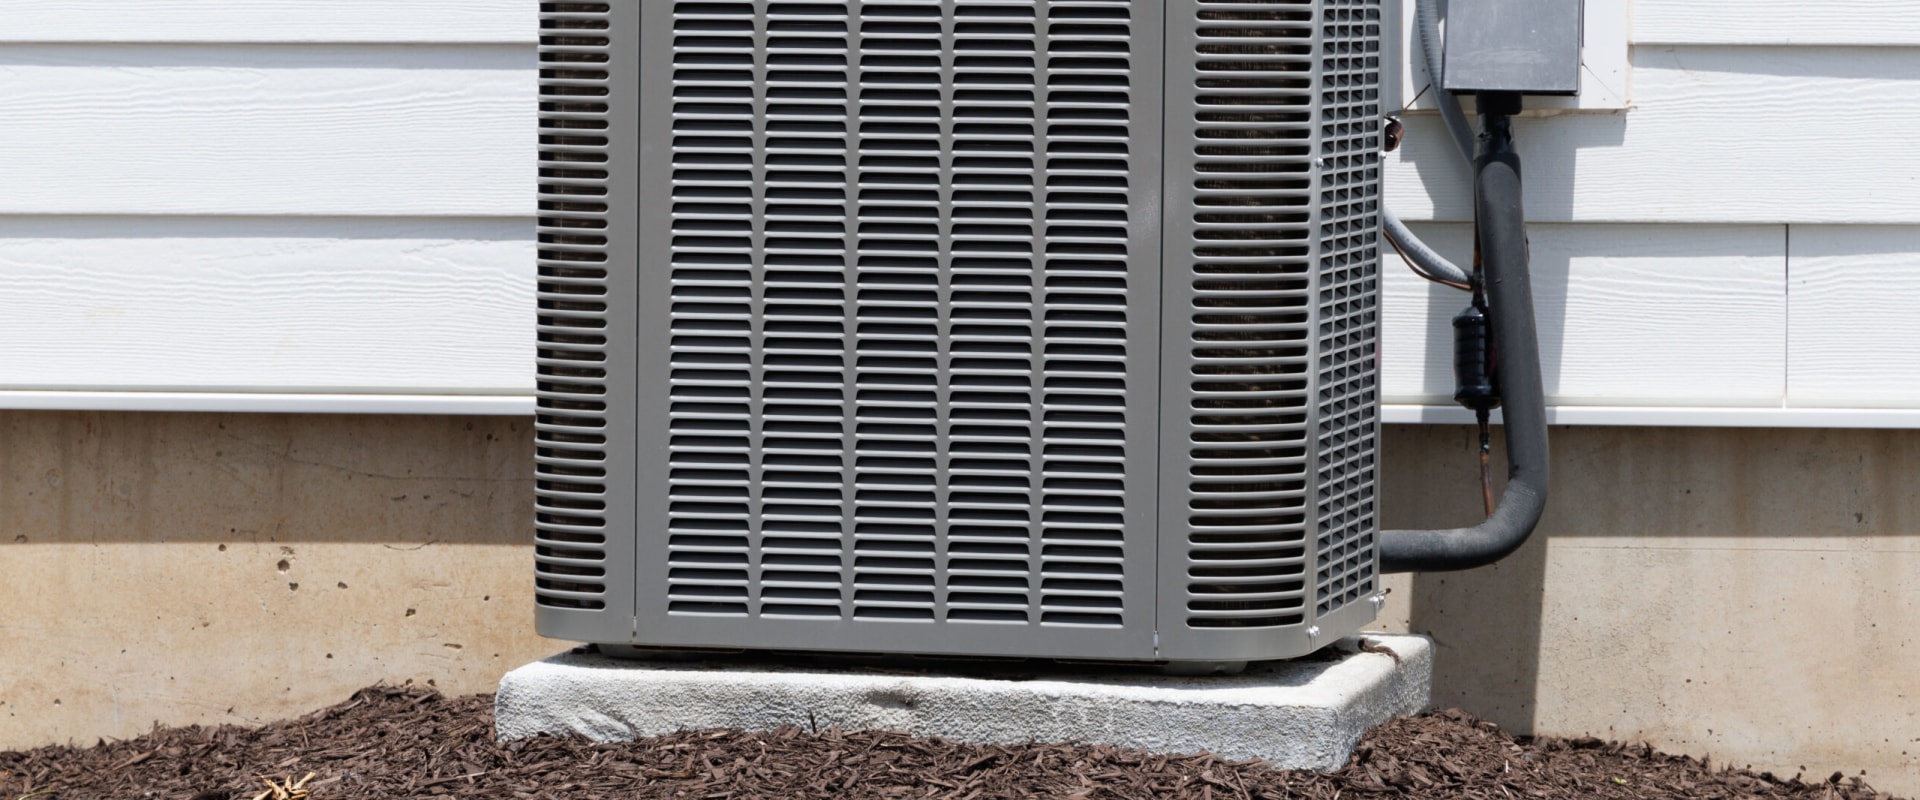 What is the least expensive hvac system?